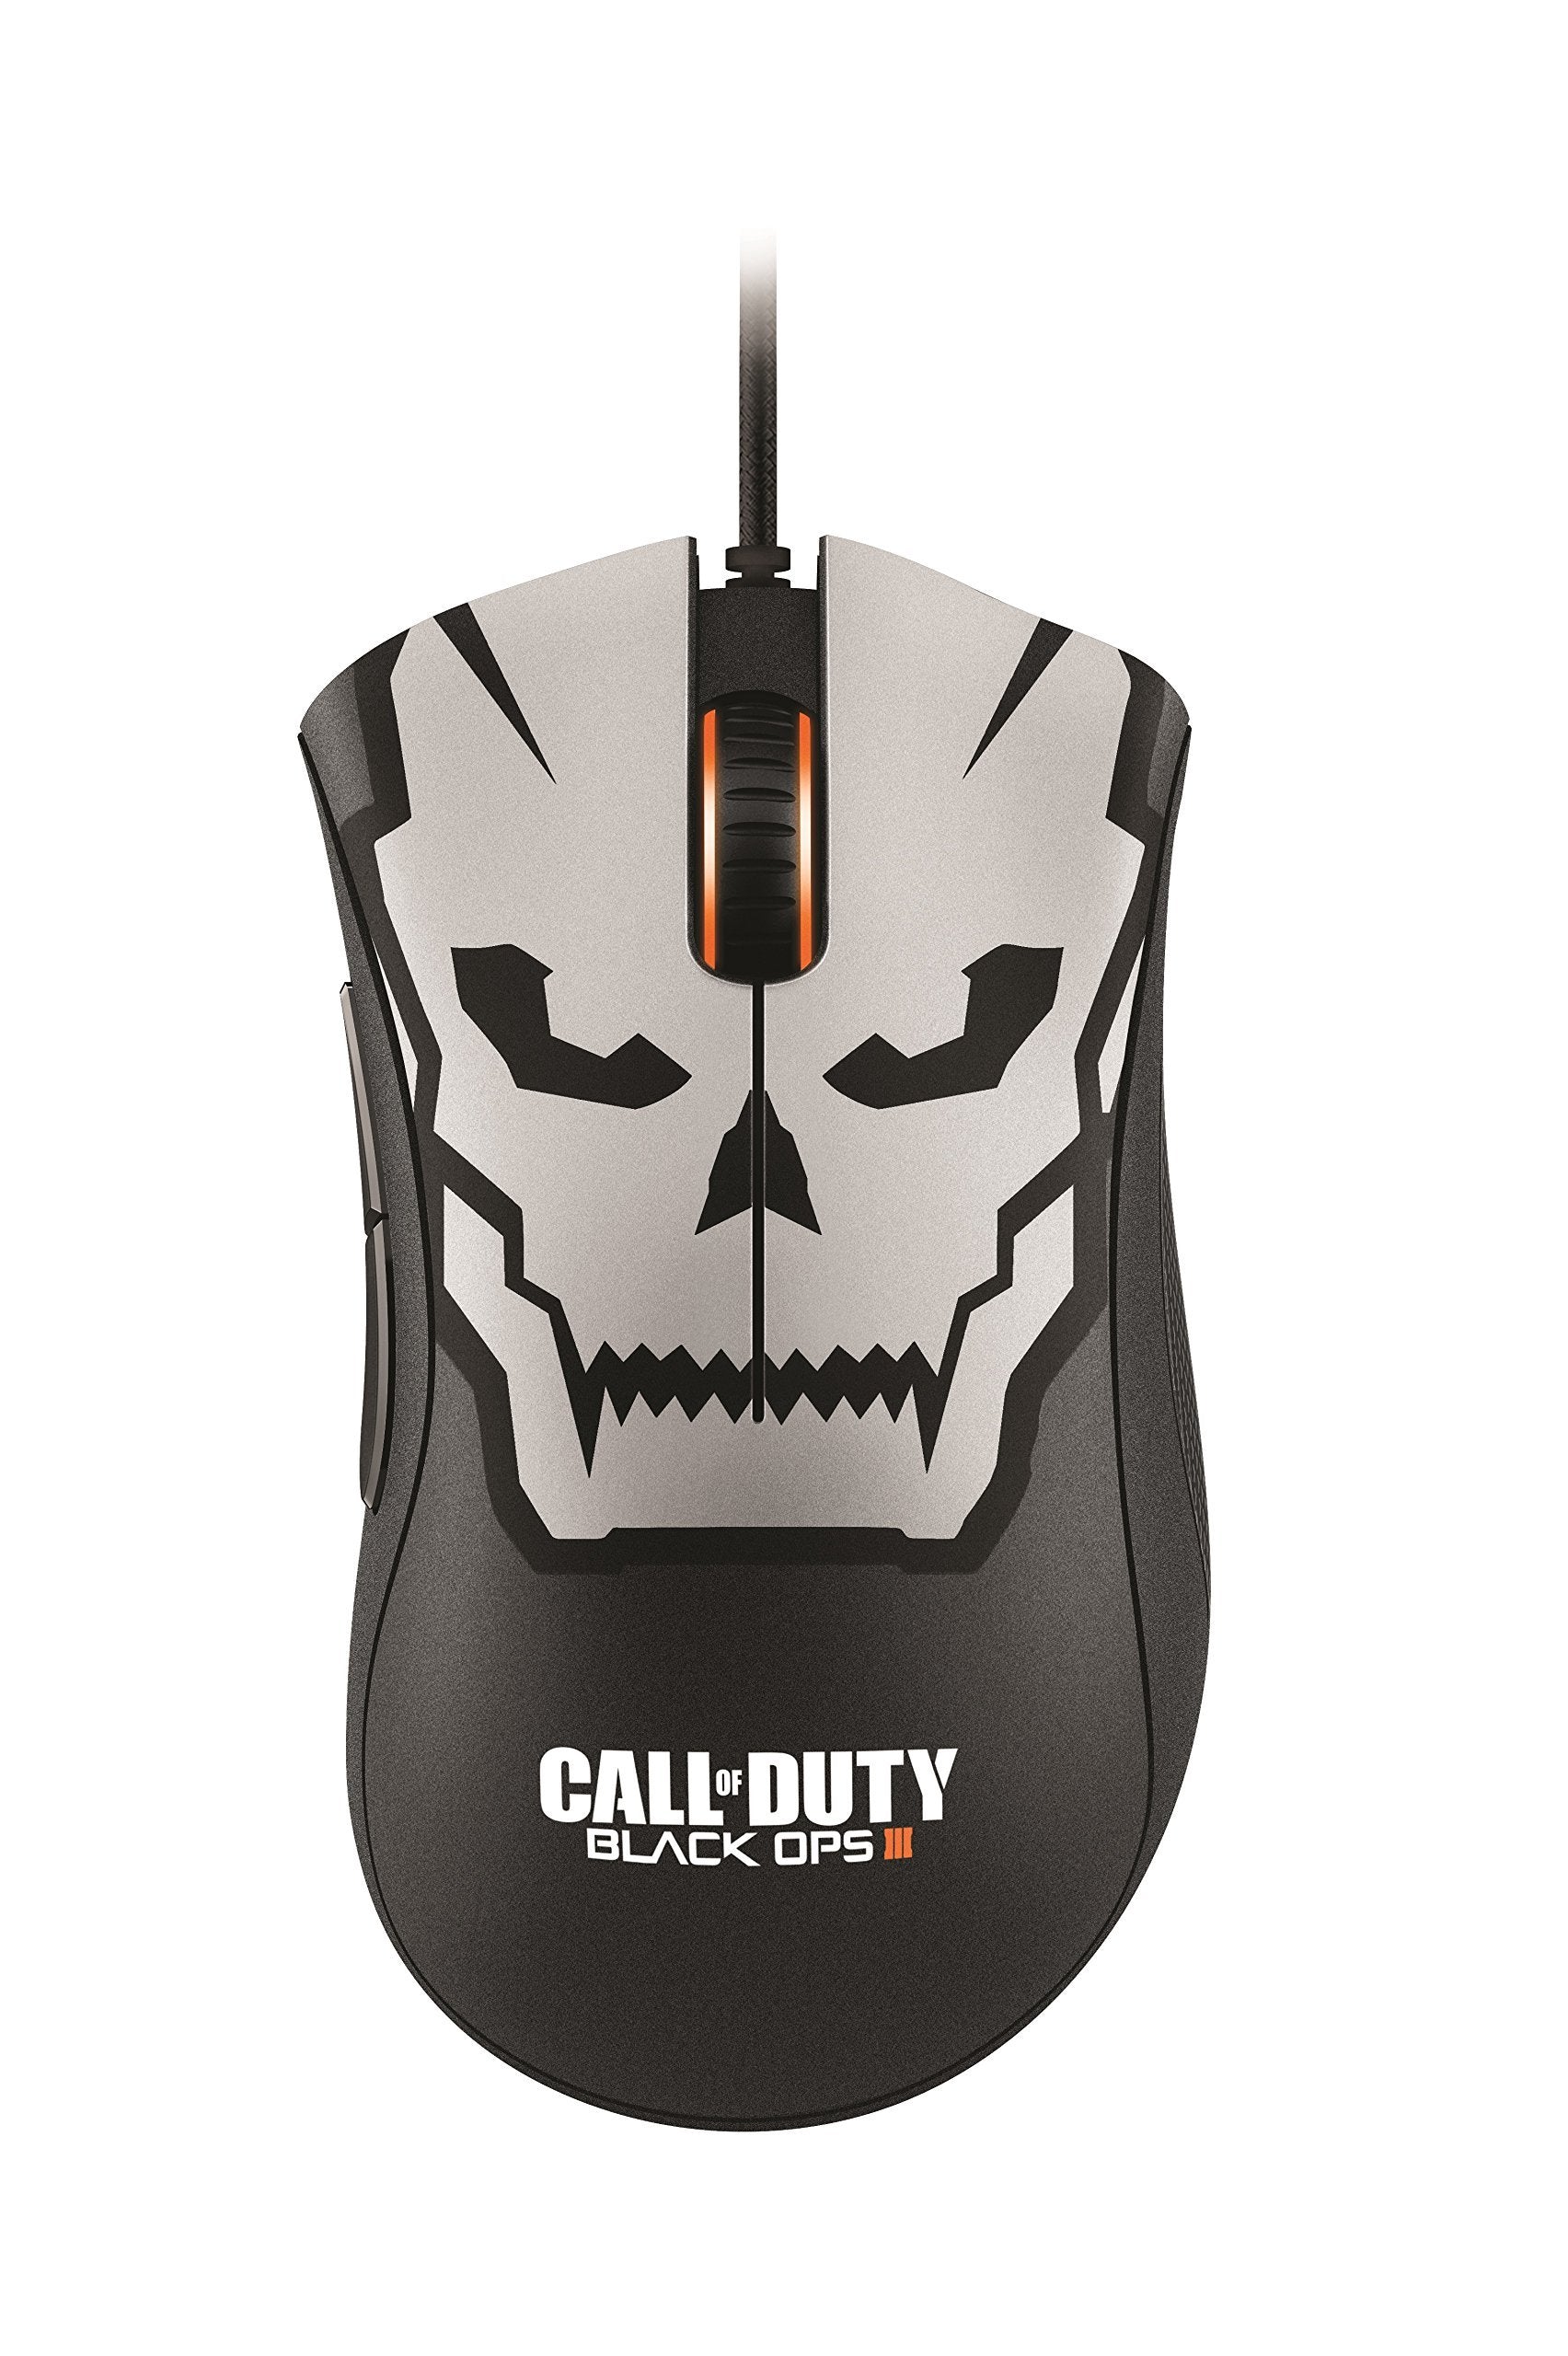 Razer DeathAdder Chroma - Multi-Color Ergonomic Gaming Mouse - 10,000 DPI Sensor - Comfortable Grip - World's Most Popular Gaming Mouse - Call of Duty Black Ops 3 (Certified Refurbished)